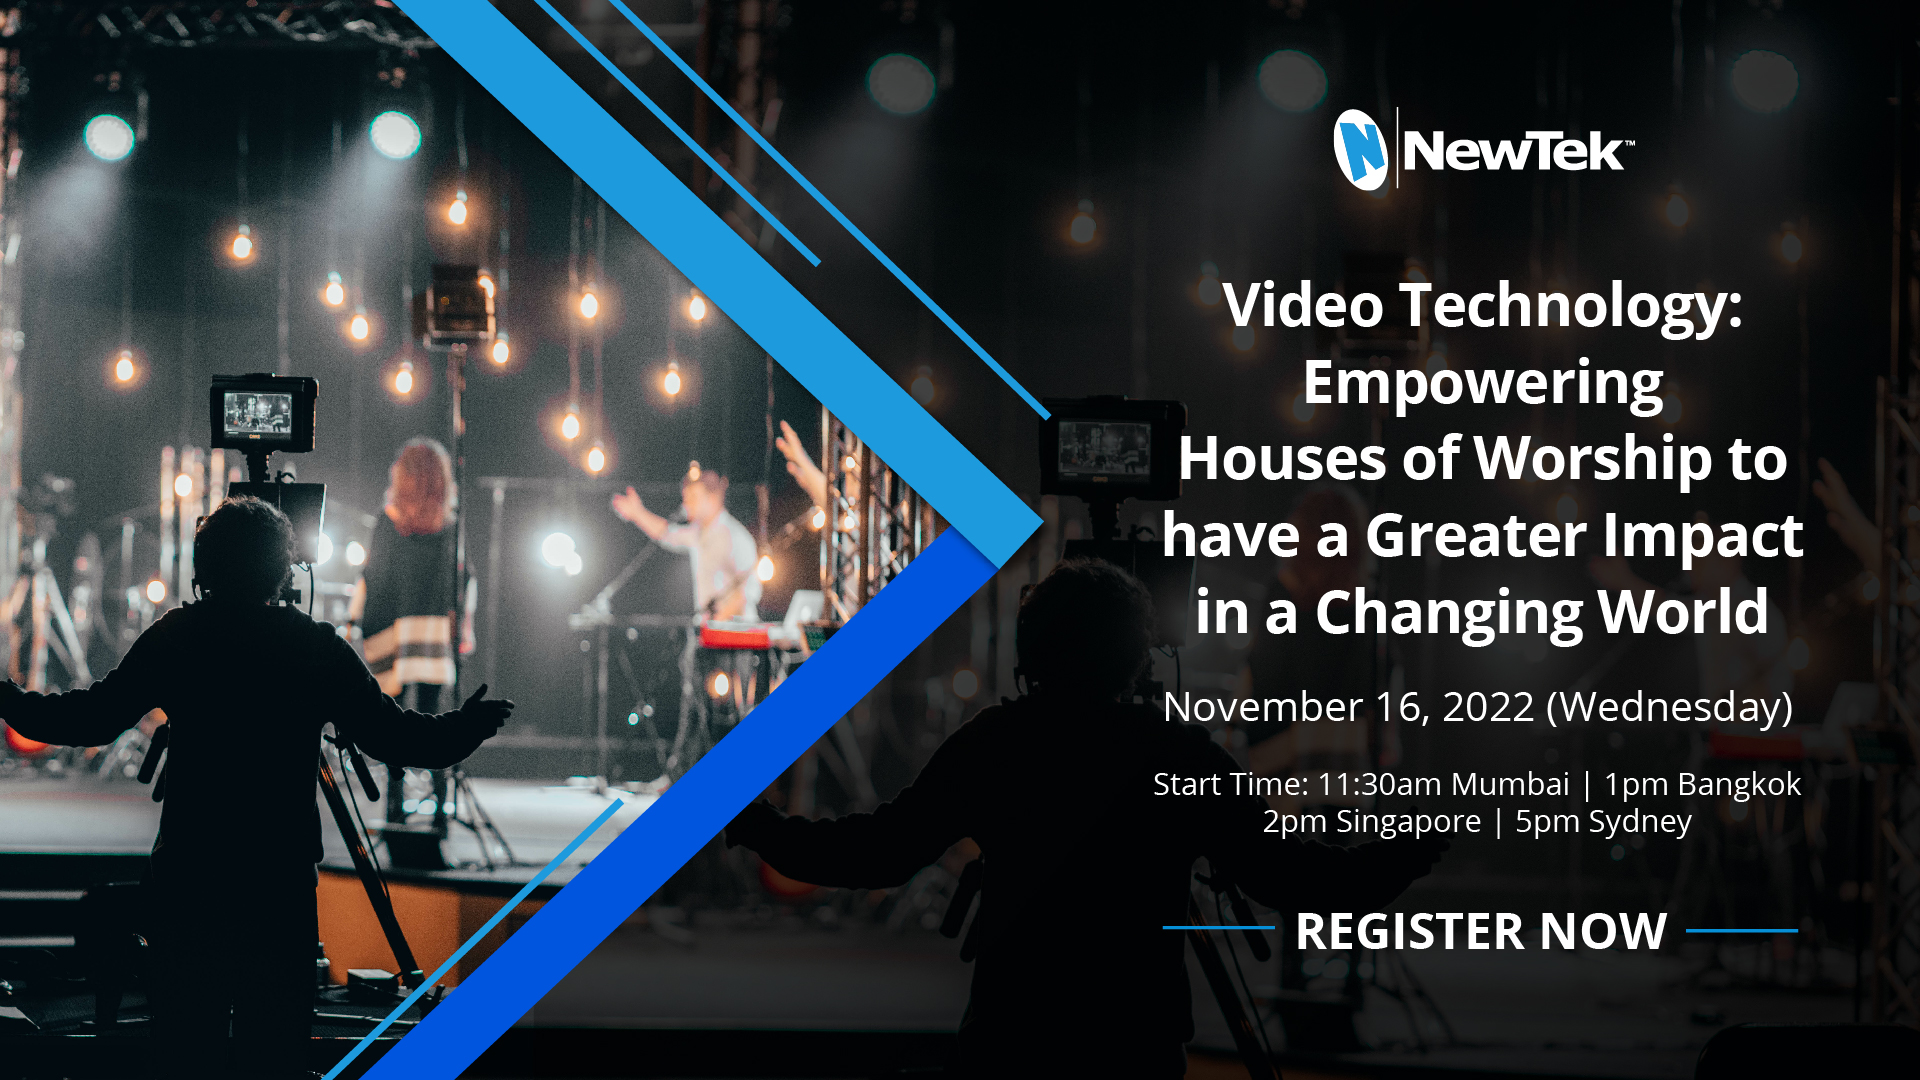 Video Technology: Empowering Houses of Worship to have a Greater Impact in a Changing World